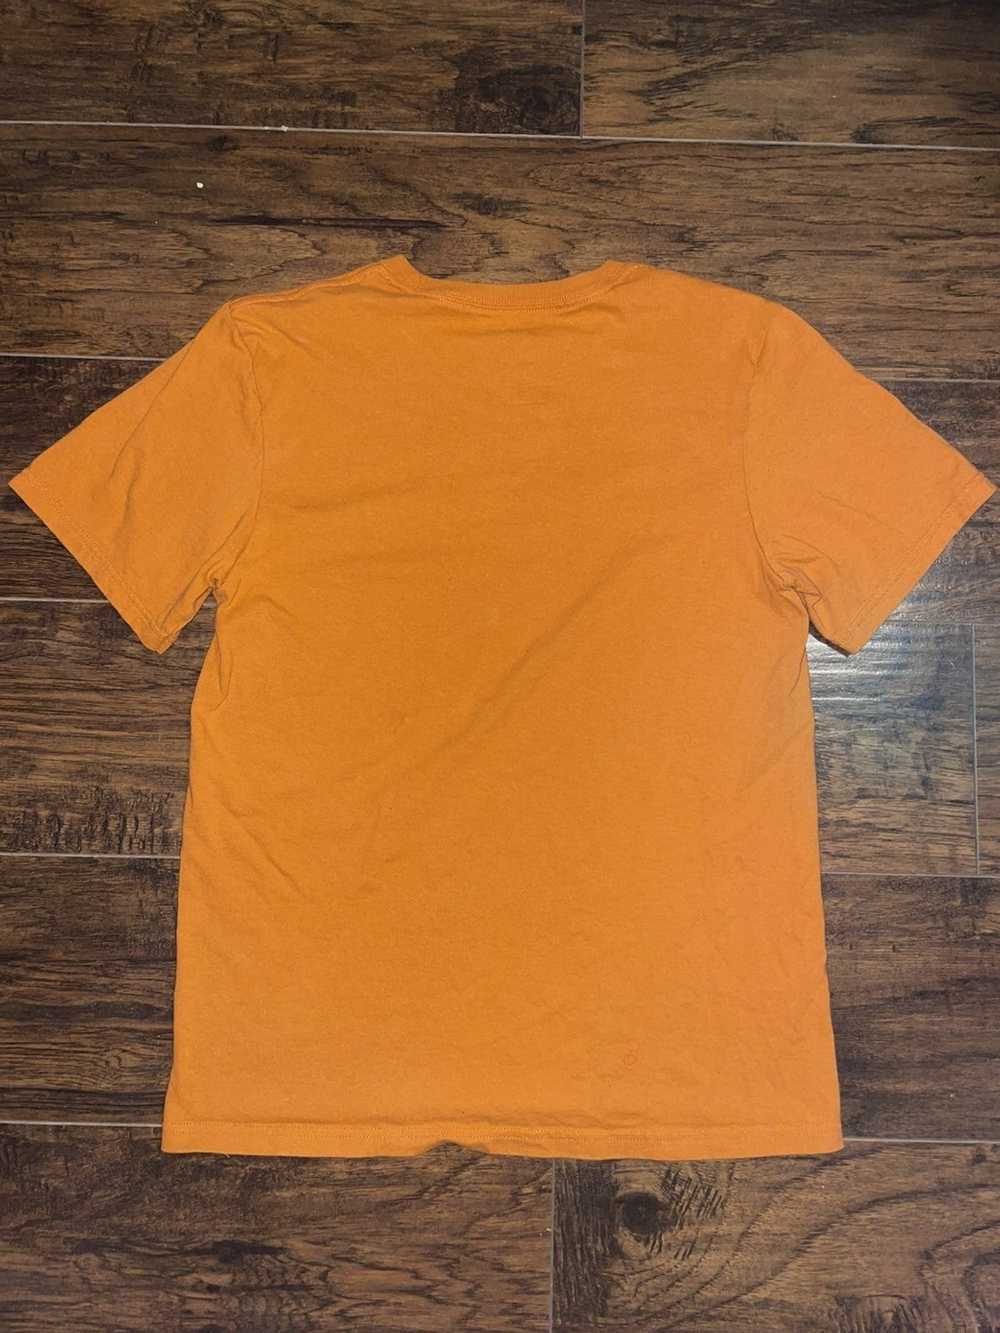 Other × Vintage University of Texas Authentic T-S… - image 3